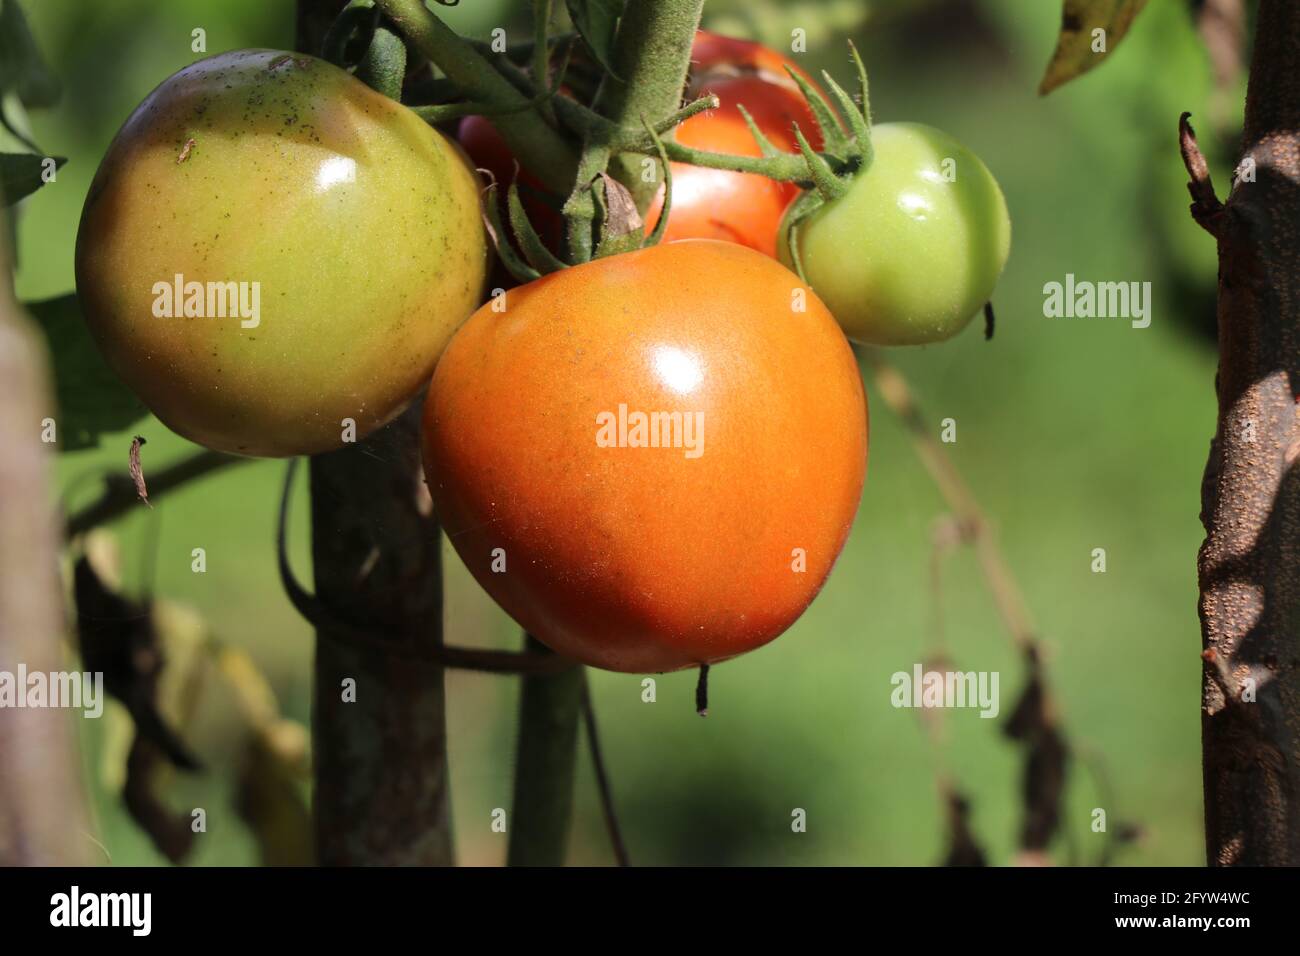 Tomatoes grown in plant ready to harvest. Sun ripen tomatoes grown on agricultural field Stock Photo